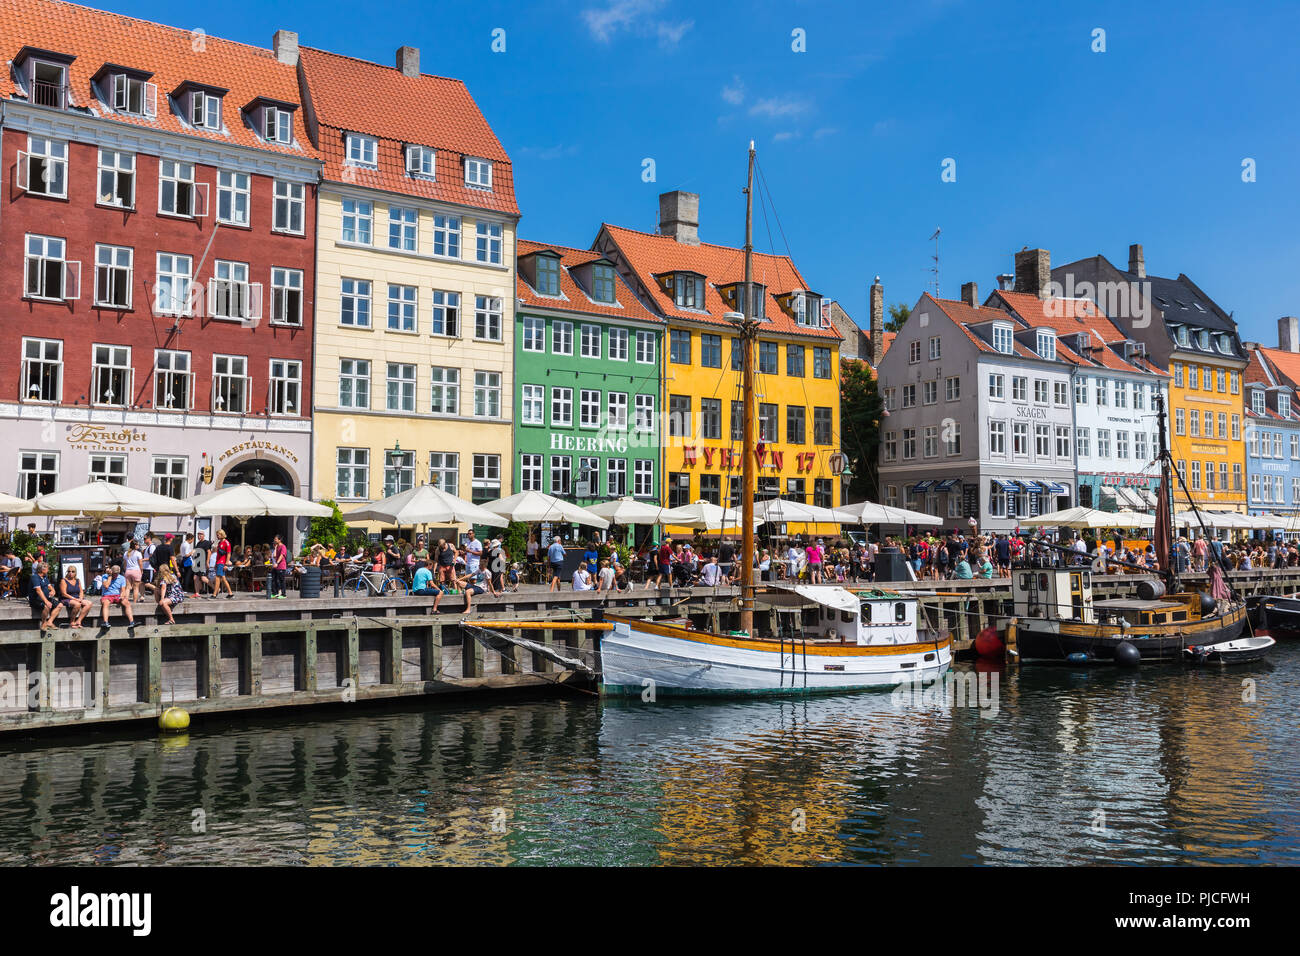 Nyhavn (New Harbour) is a 17th-century waterfront, canal and entertainment district in Copenhagen, Denmark. Stock Photo